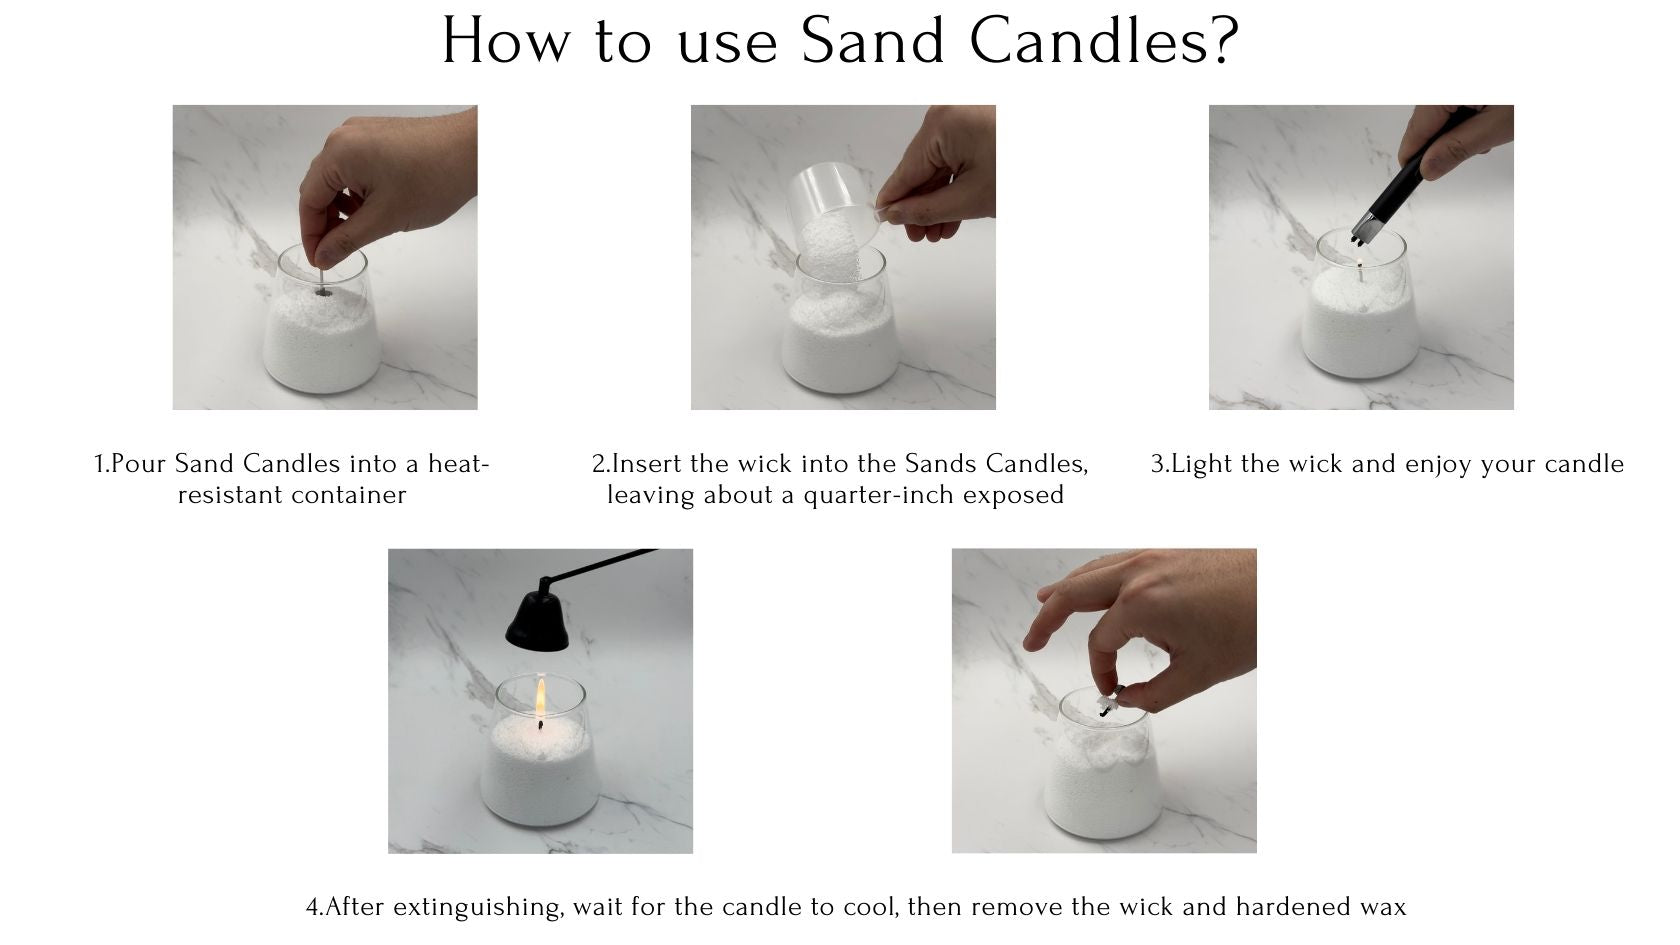 How to use Sand Candles